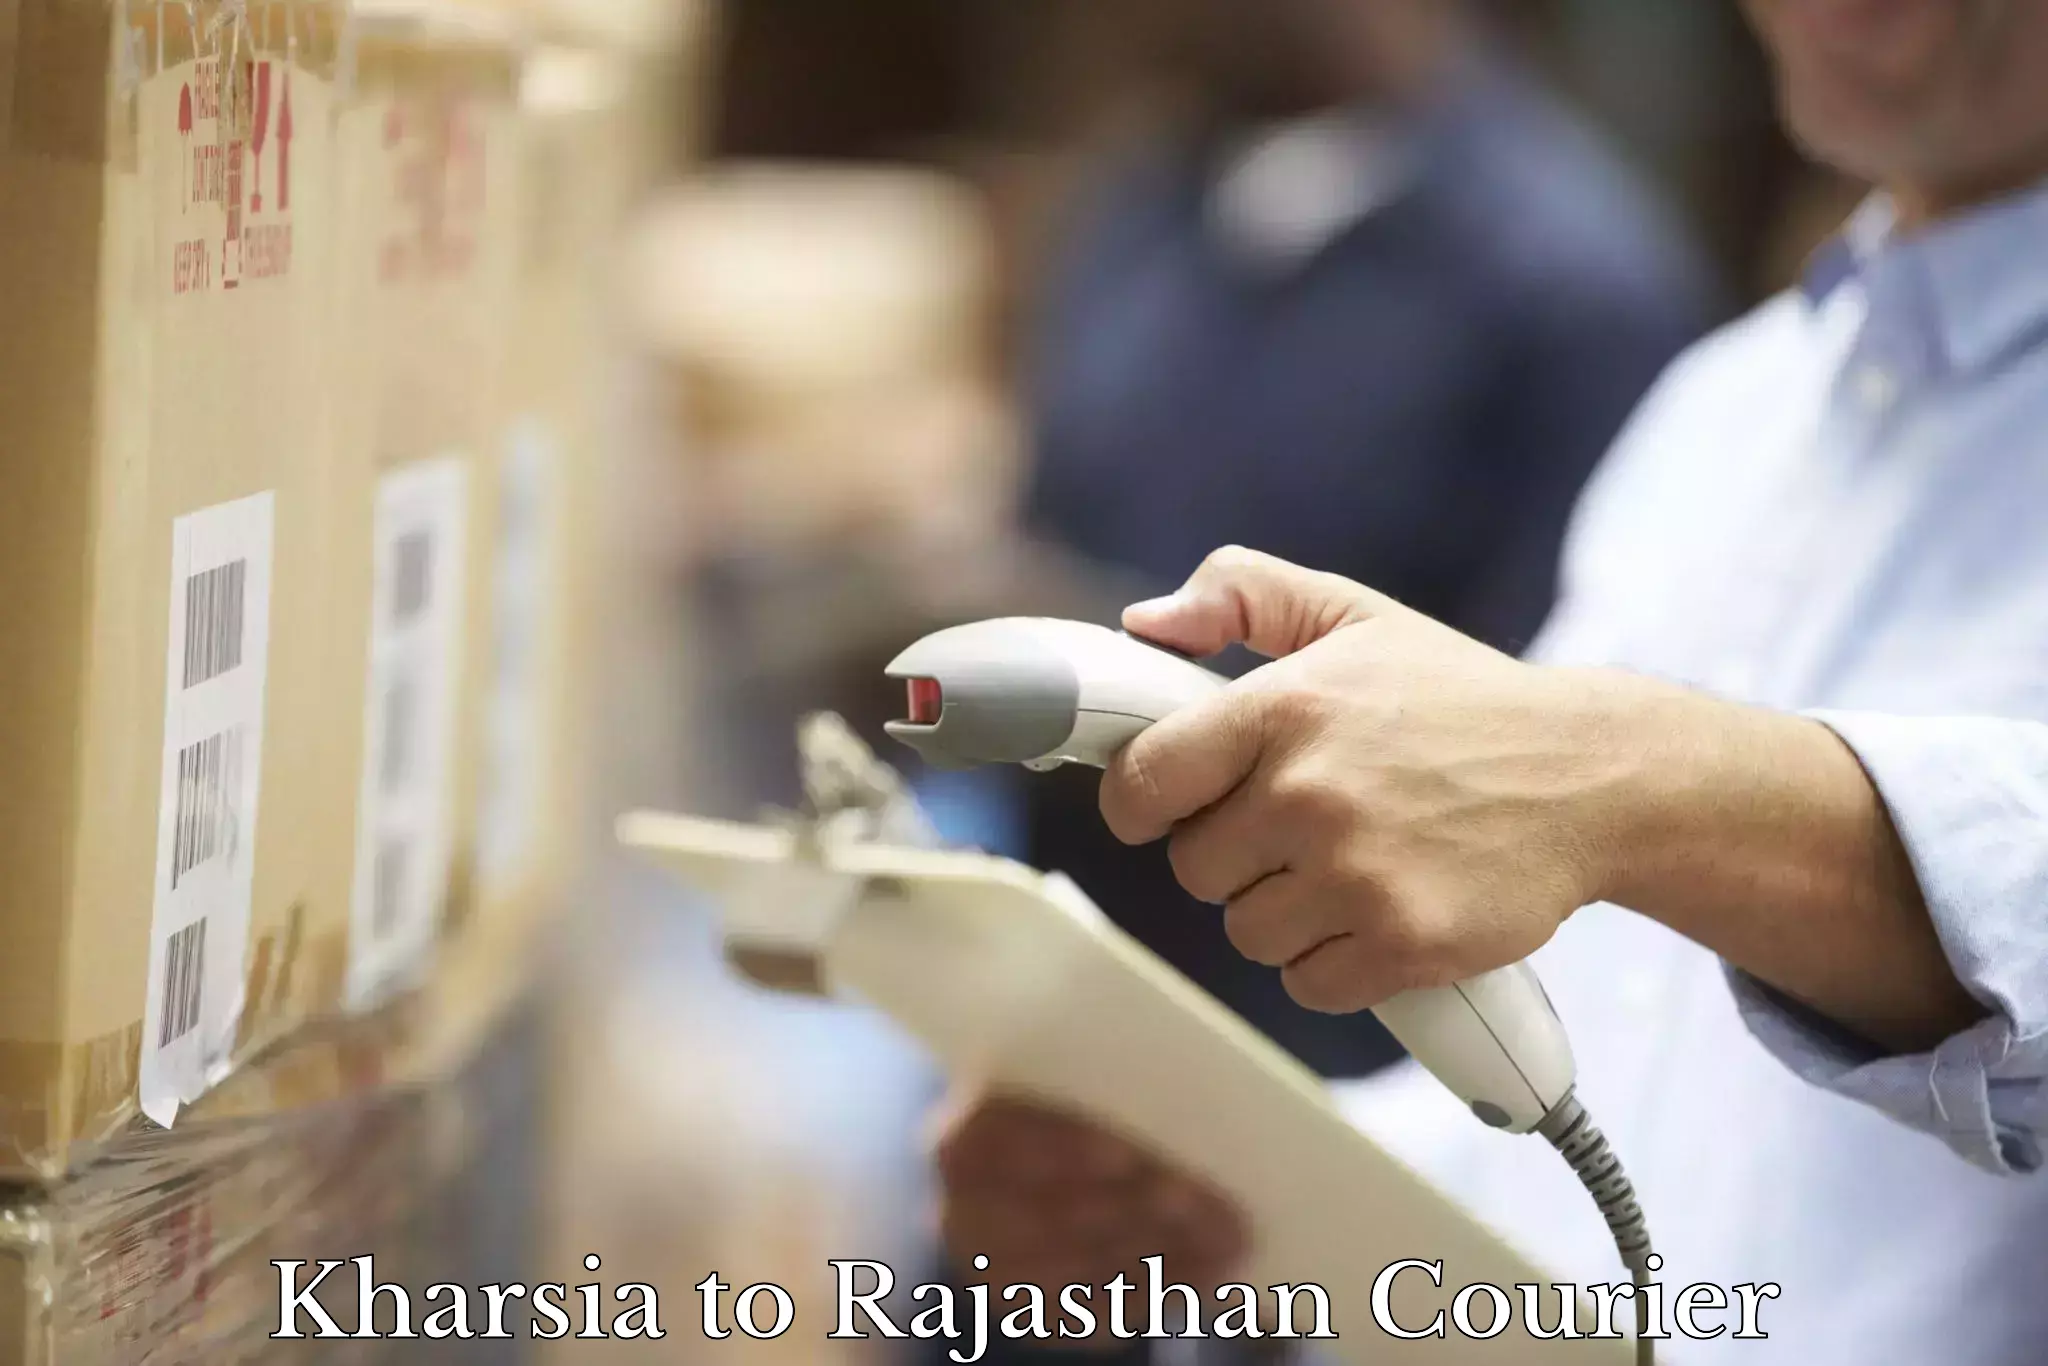 Rapid shipping services Kharsia to Alwar